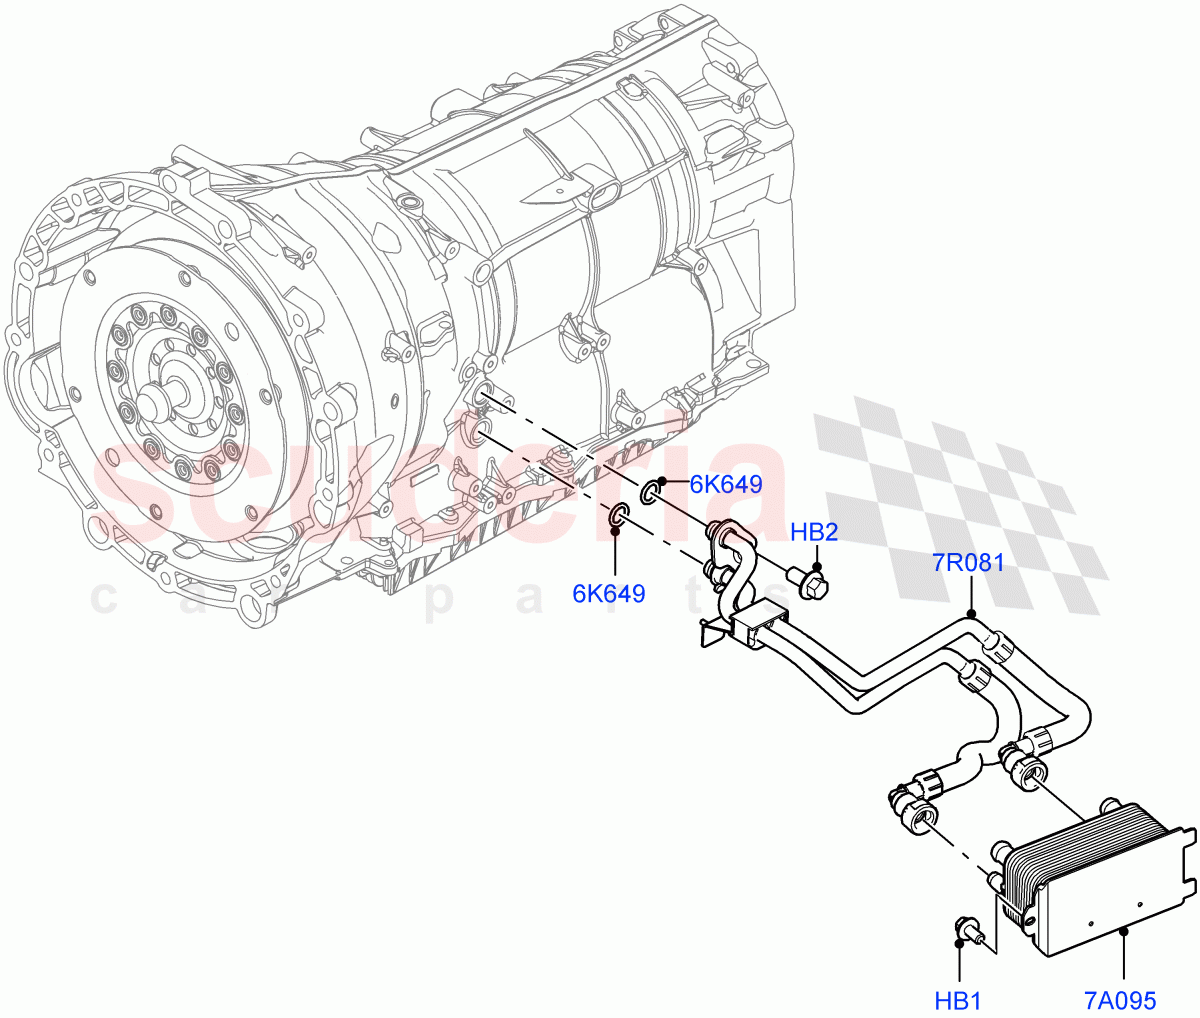 Transmission Cooling Systems(3.0L AJ20P6 Petrol High,8 Speed Auto Trans ZF 8HP76,3.0L AJ20D6 Diesel High)((V)FROMKA000001) of Land Rover Land Rover Range Rover Sport (2014+) [2.0 Turbo Diesel]